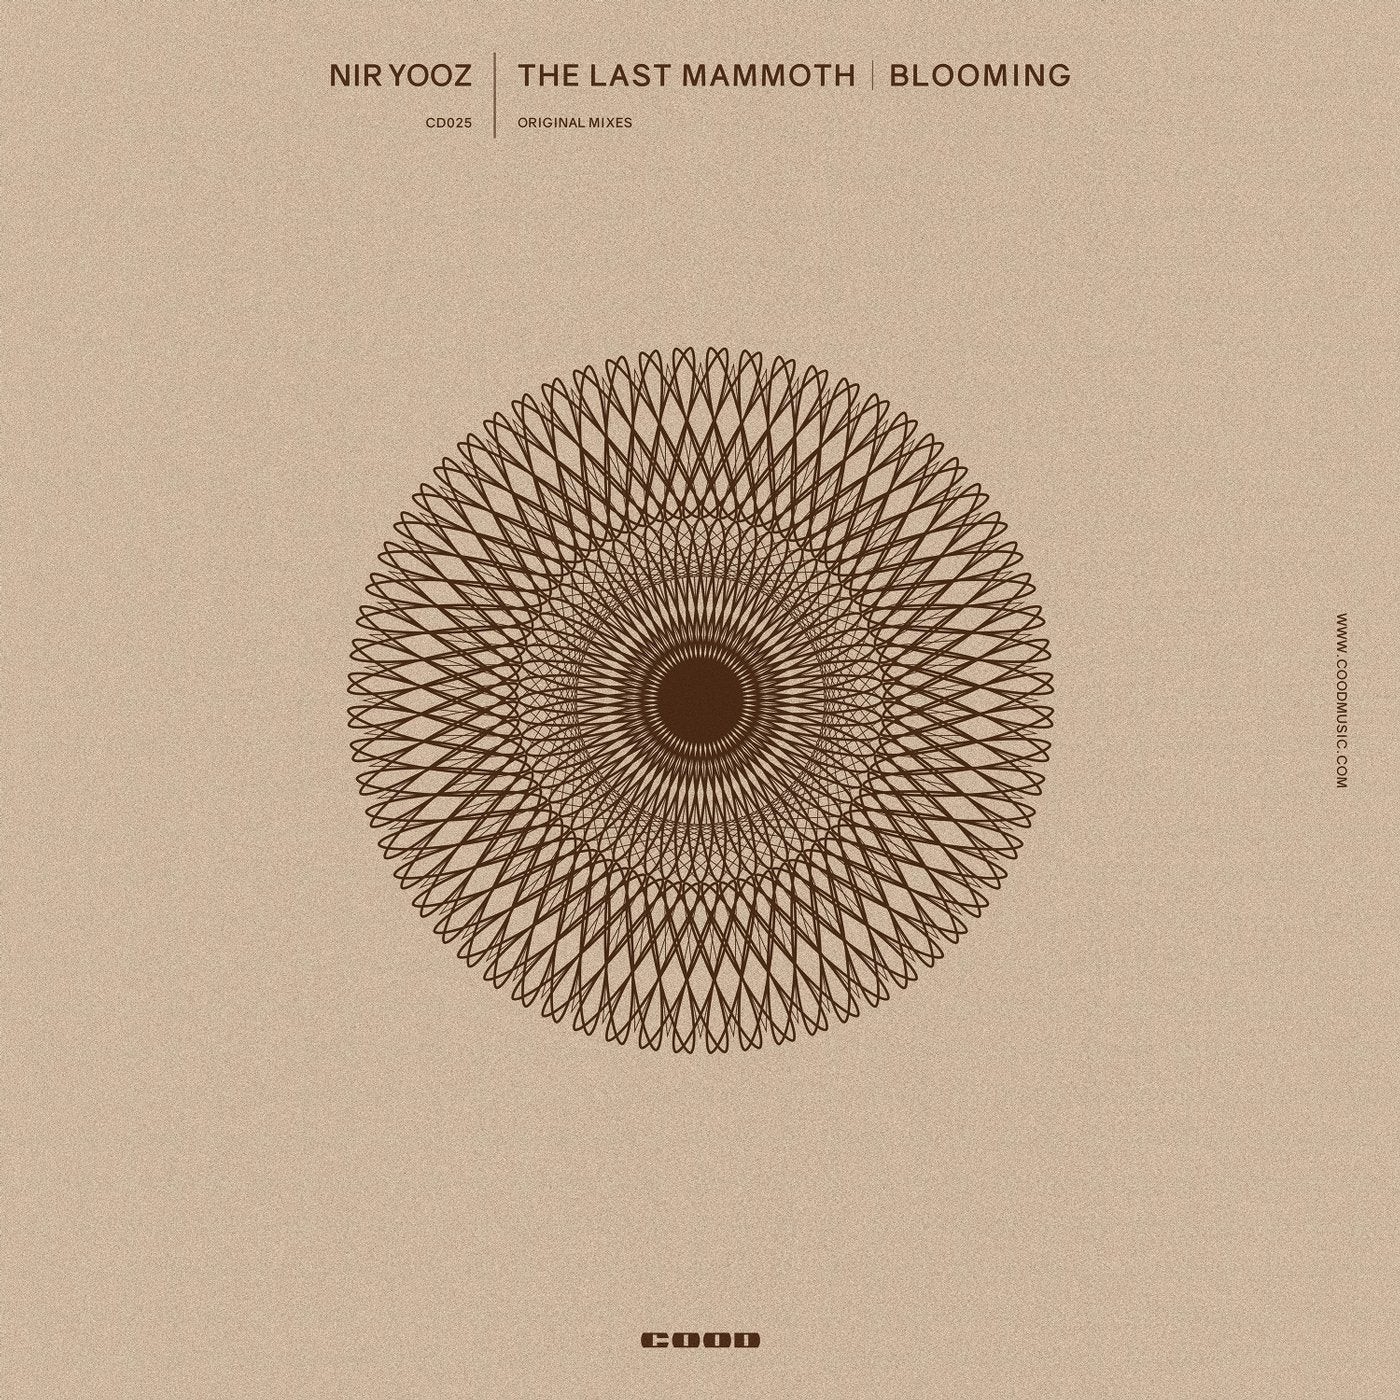 The Last Mammoth / Blooming